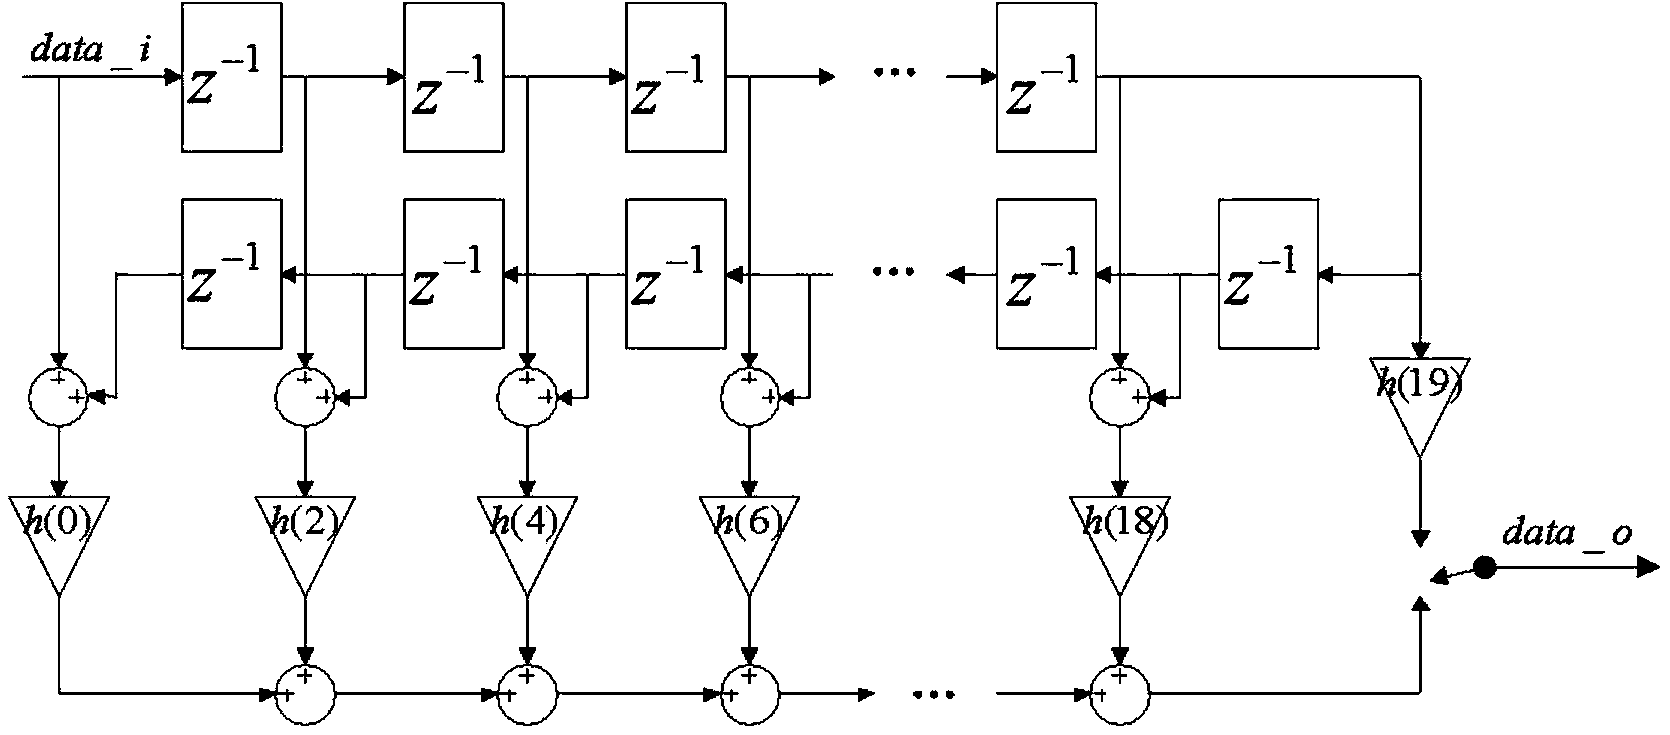 Oversampling 64-time sigma-delta modulation circuit with effective bit being 18